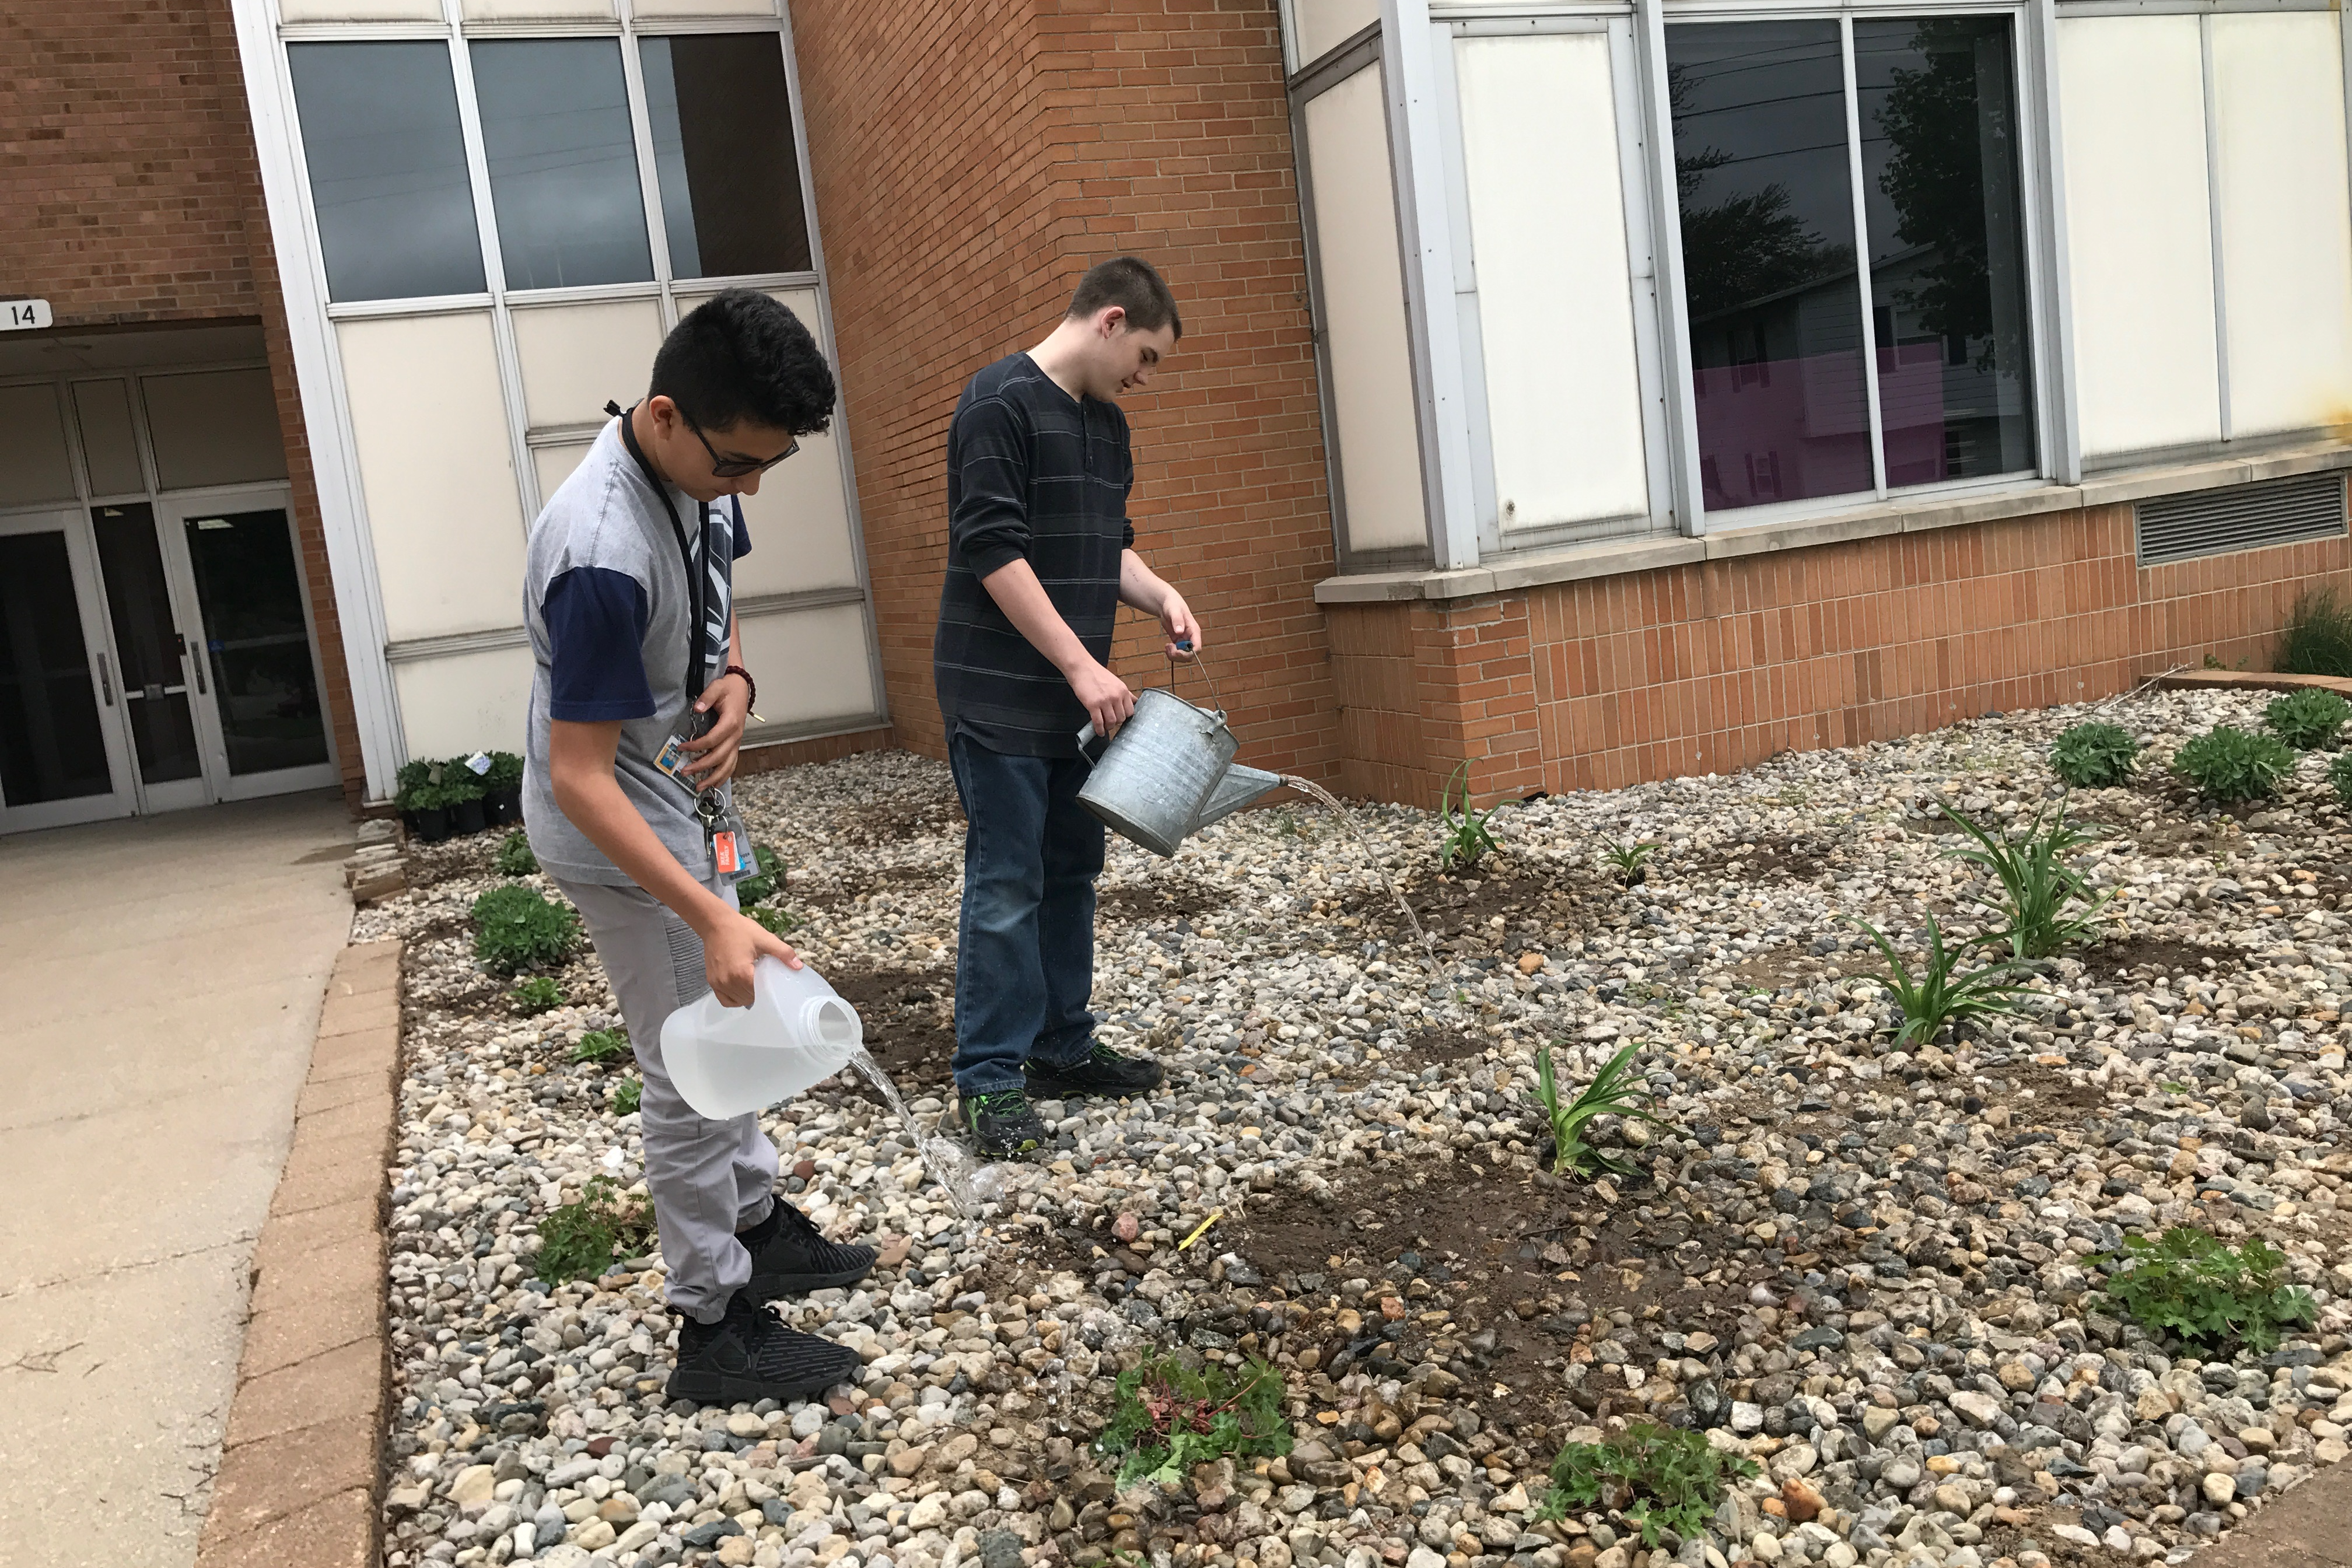 Students watering the garden outside the school